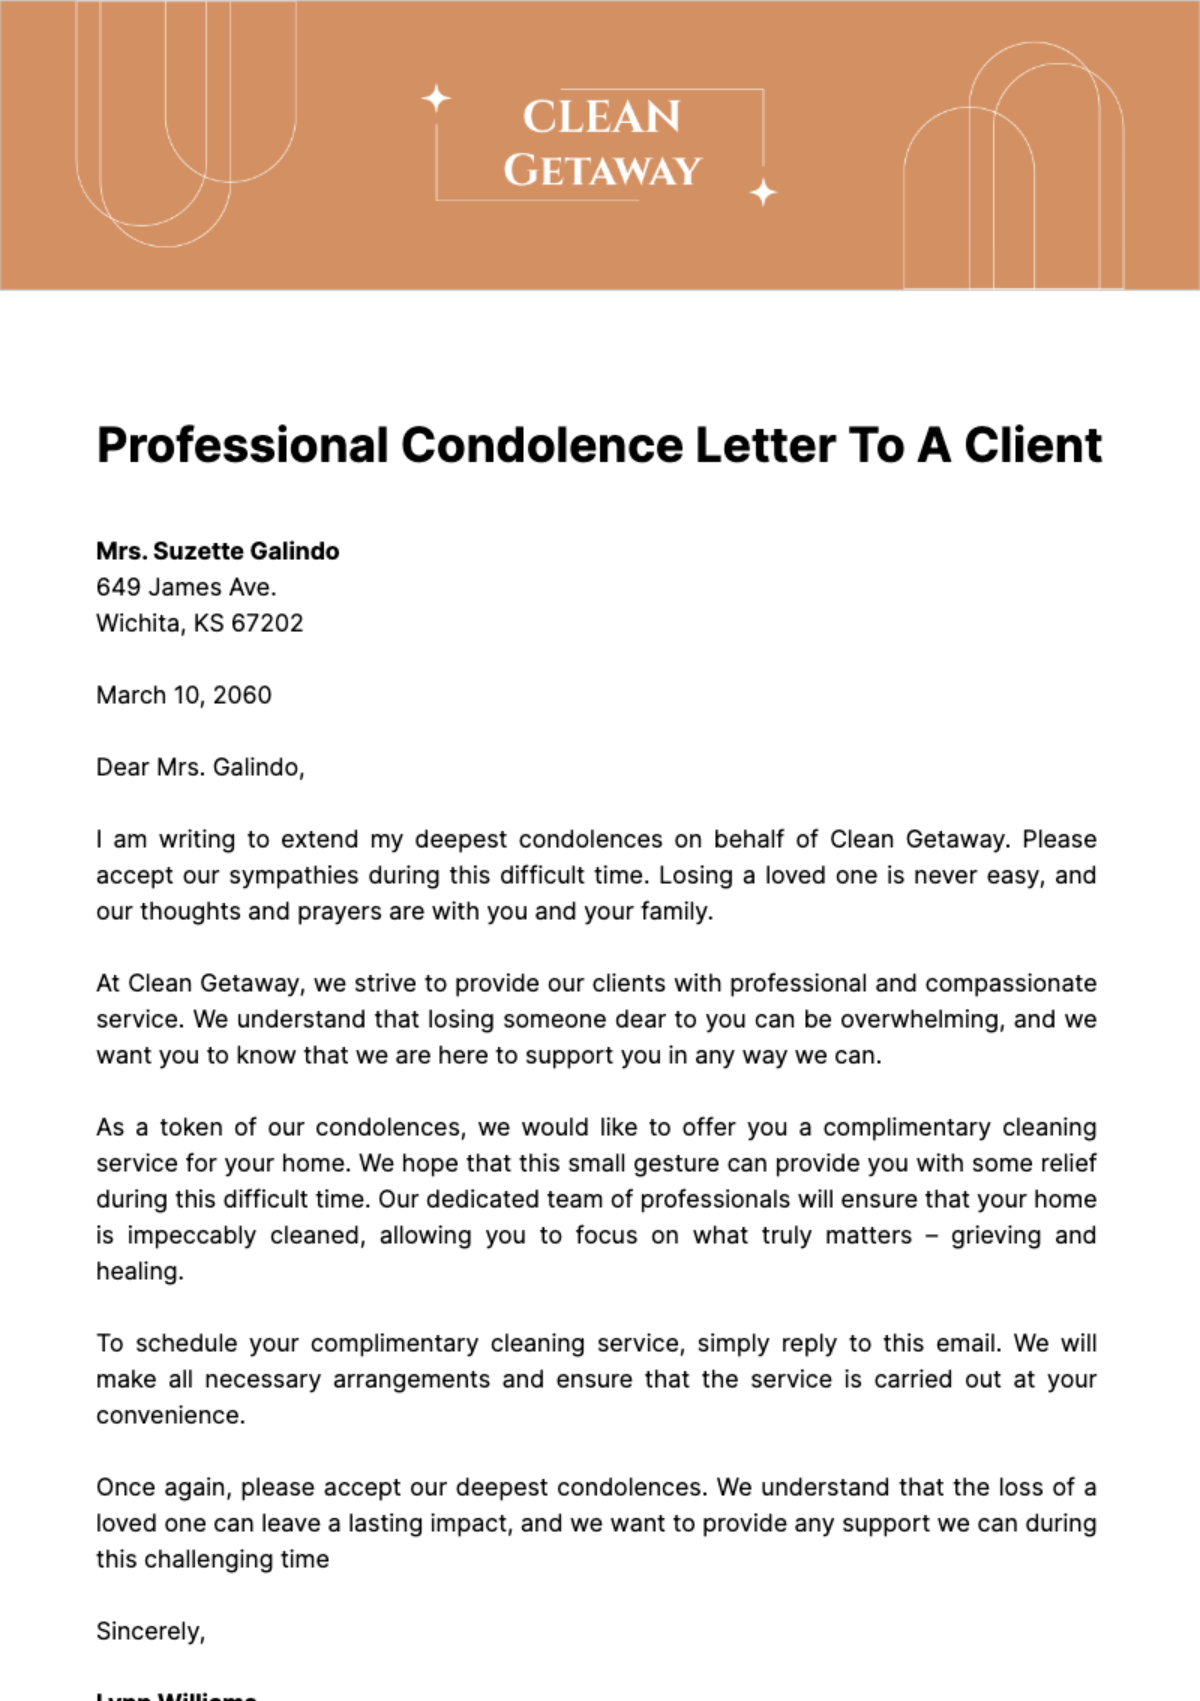 Free Professional Condolence Letter to a Client Template